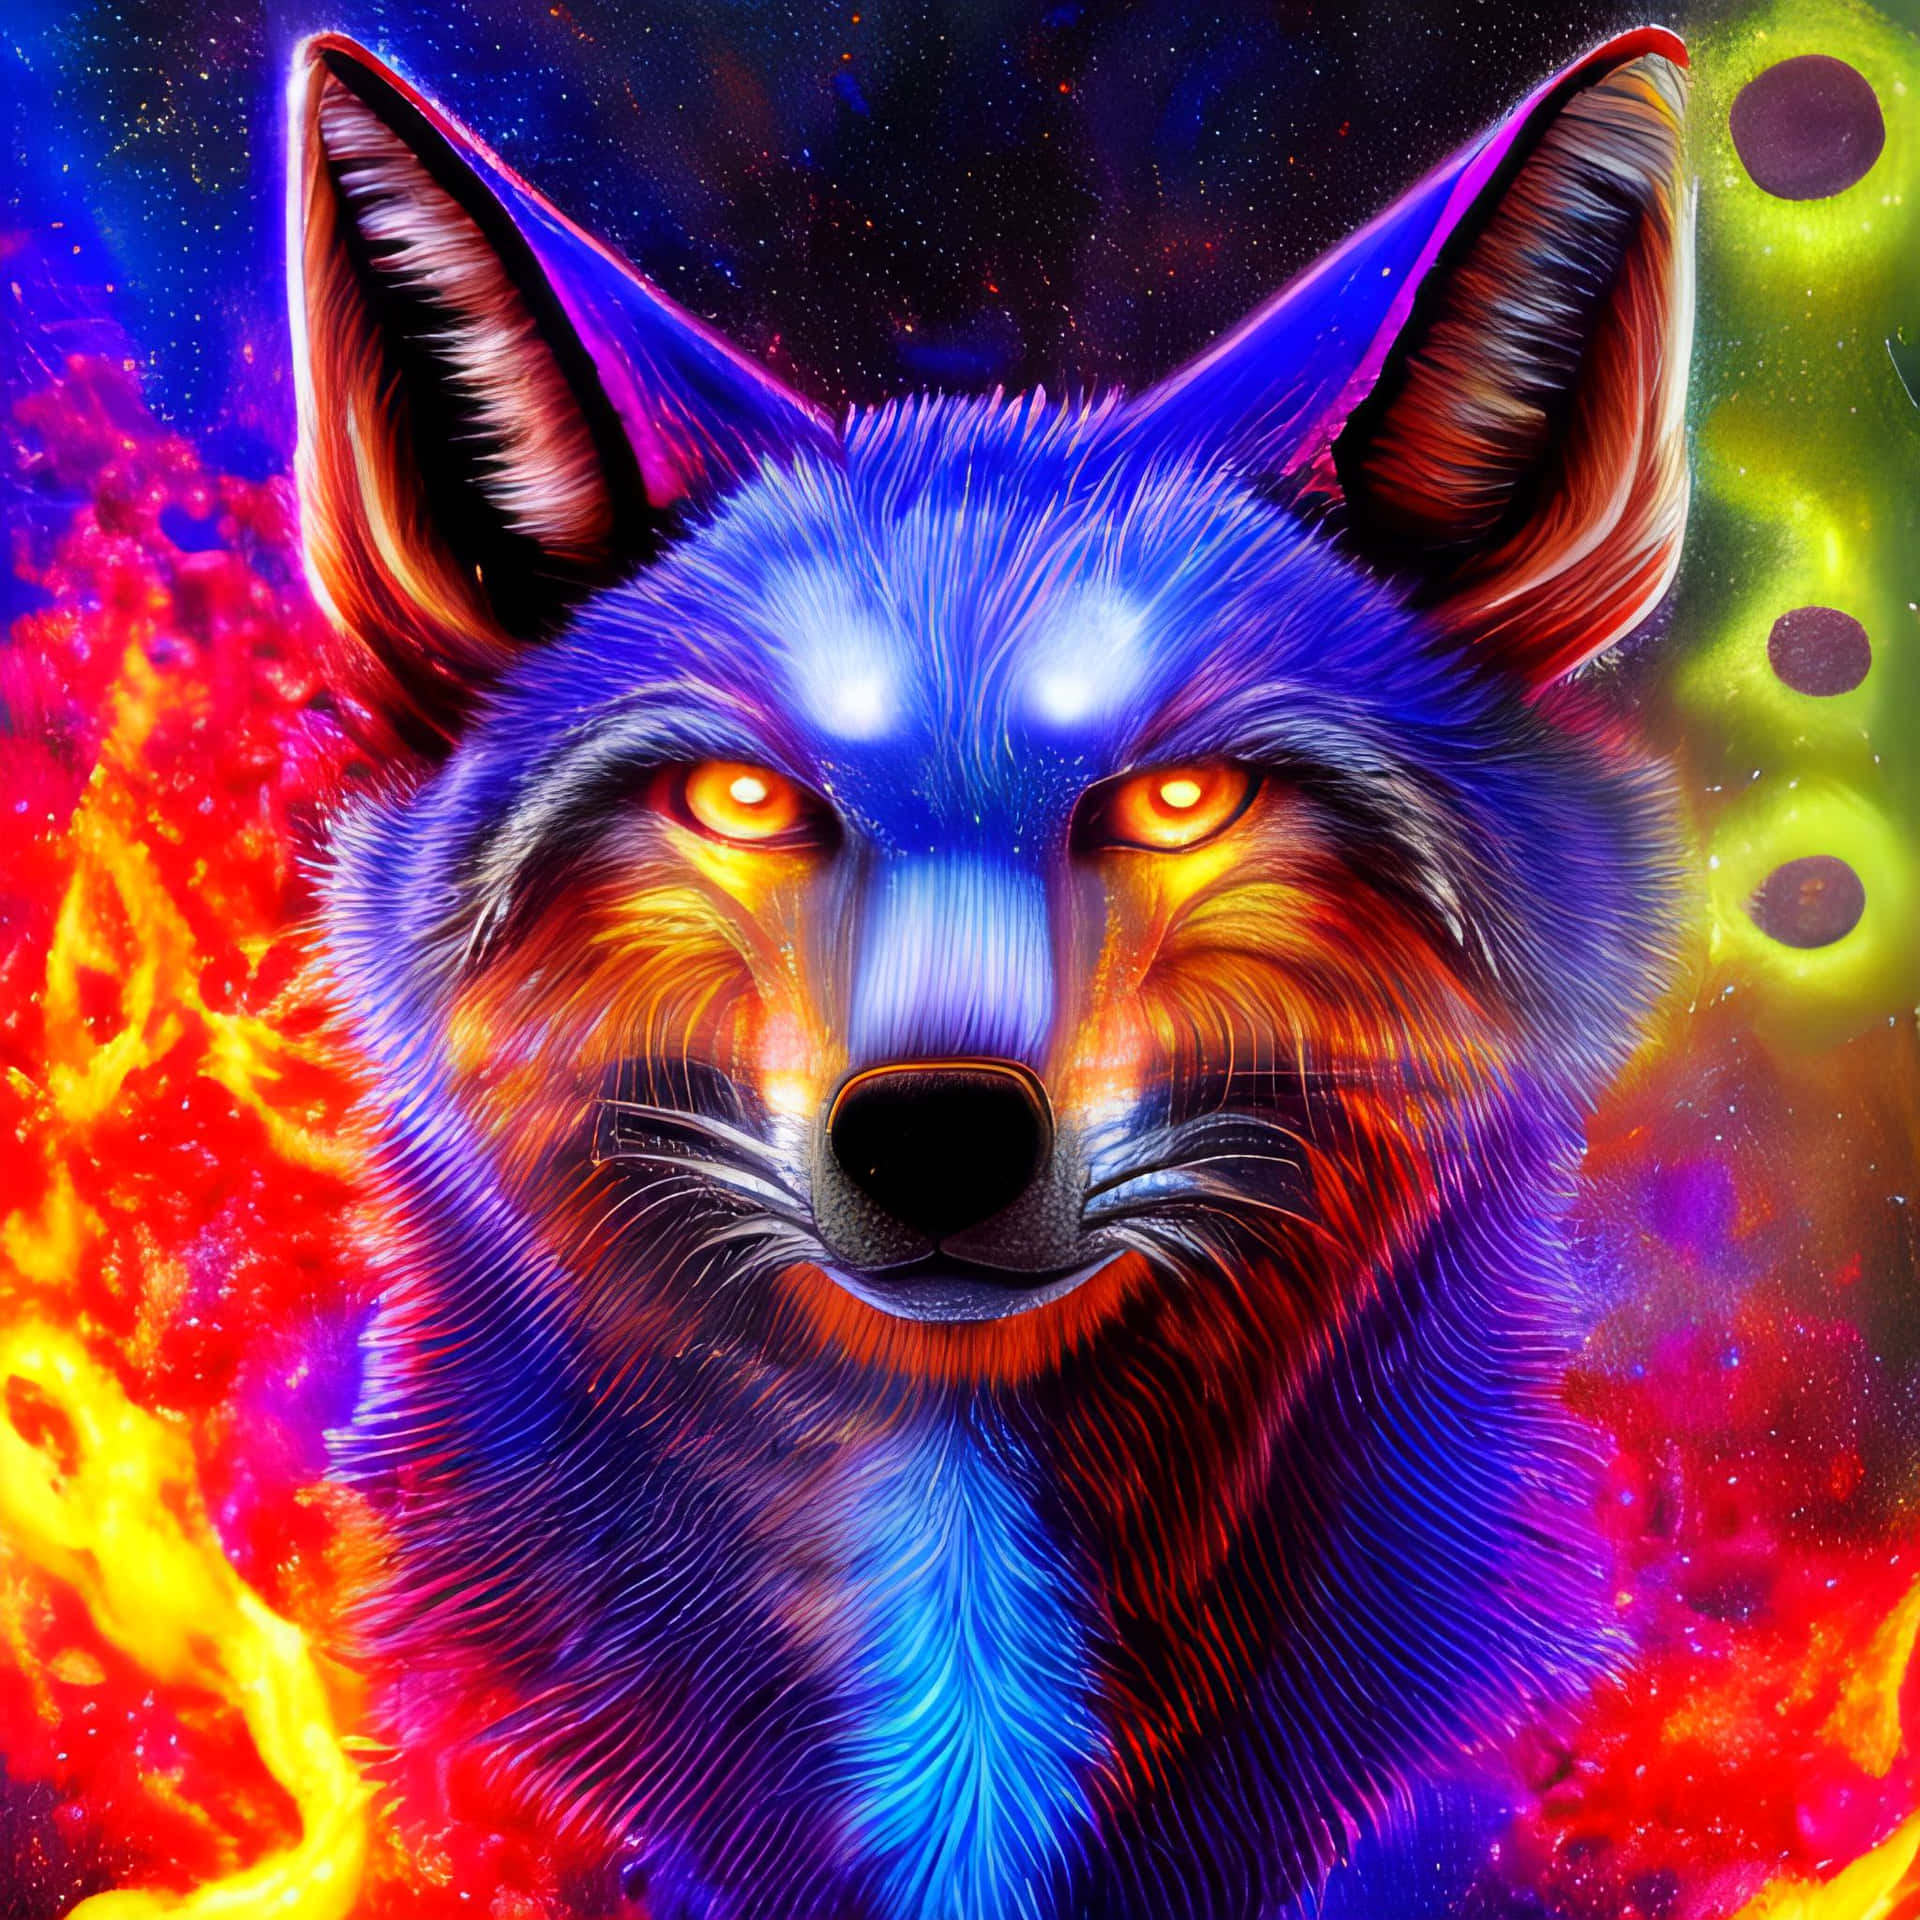 Download A Colorful Fox With A Glowing Eye Wallpaper | Wallpapers.com